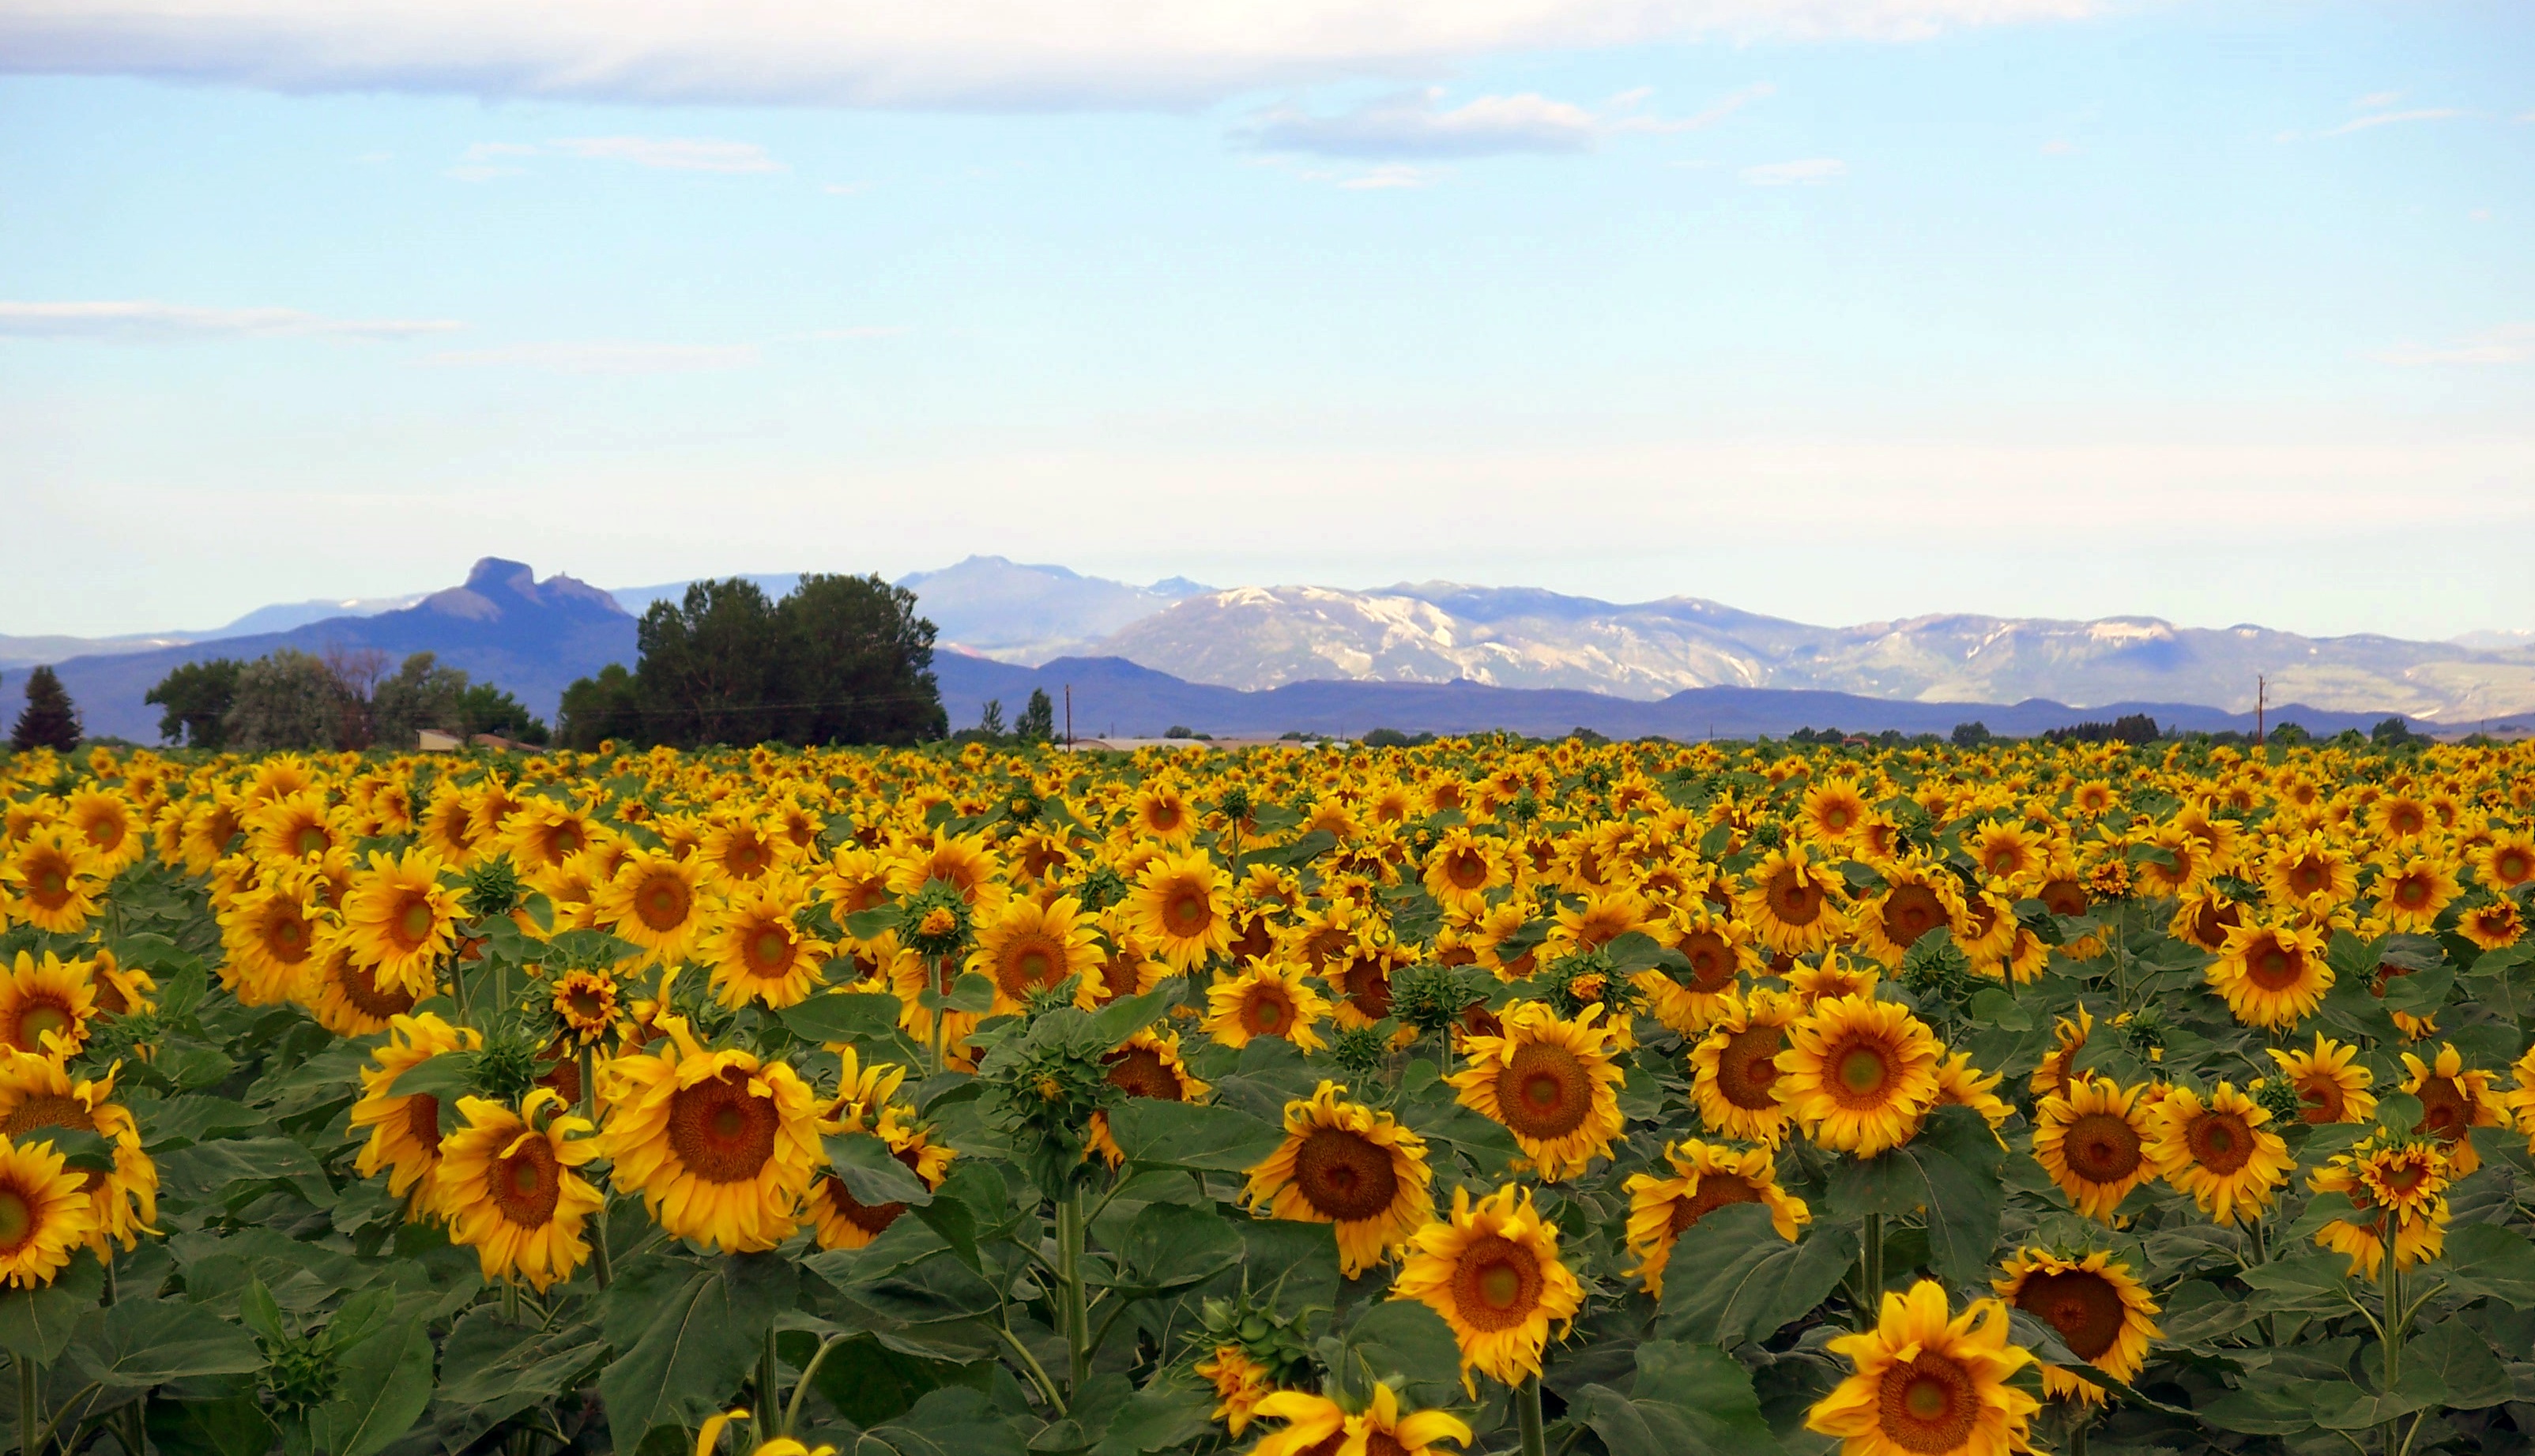 Looking west to Heart Mountain while in a field of Sunflowers. Powell, Wyoming